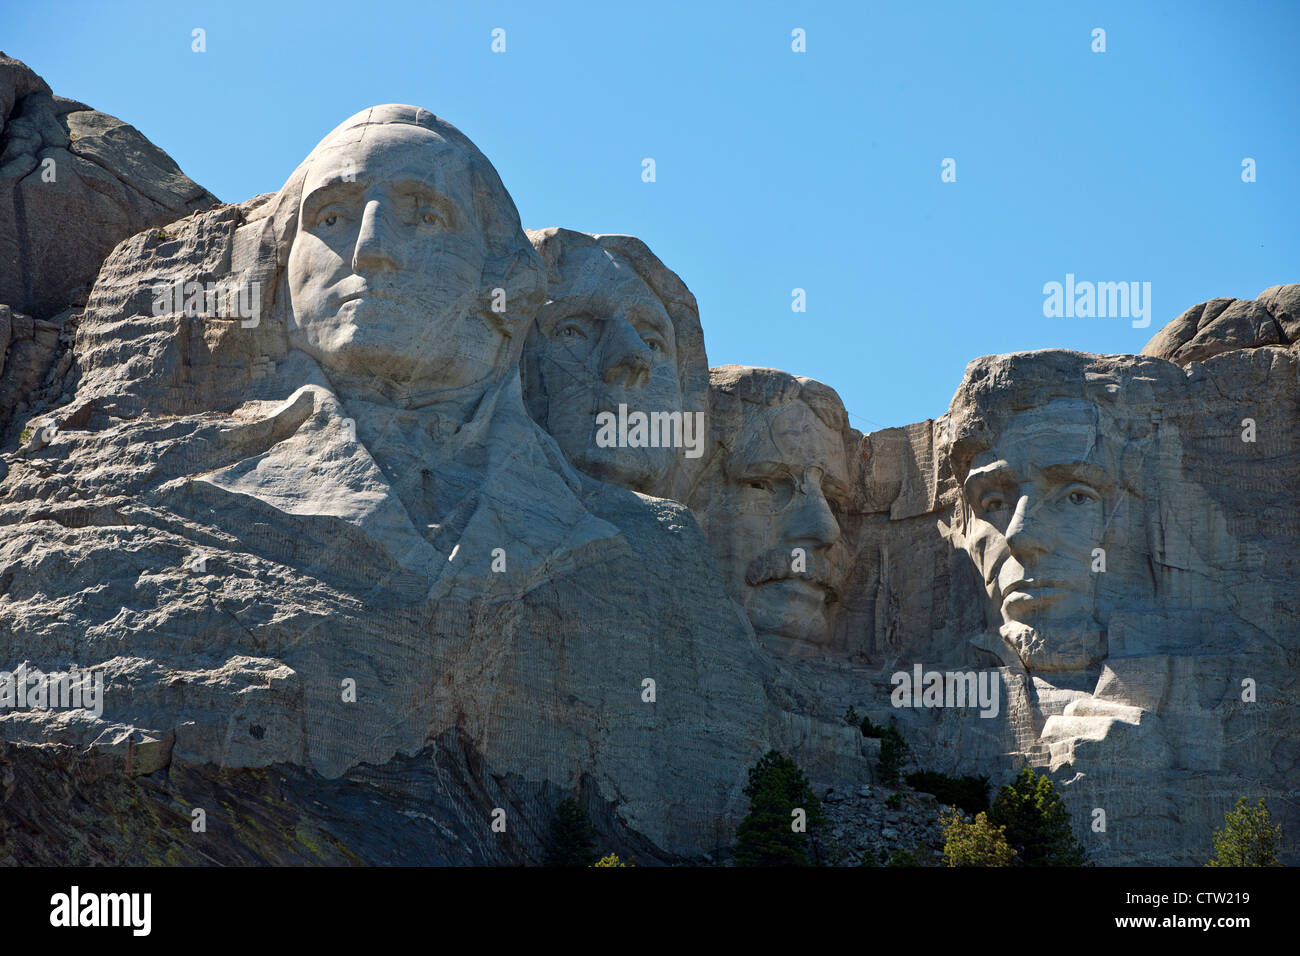 Detailed view Mt. Rushmore with sculptures of former presidents George Washington, Thomas Jefferson, Theodore Roosevelt, and Abraham Lincoln, Mount Rushmore National Monument, South Dakota, United States of America Stock Photo